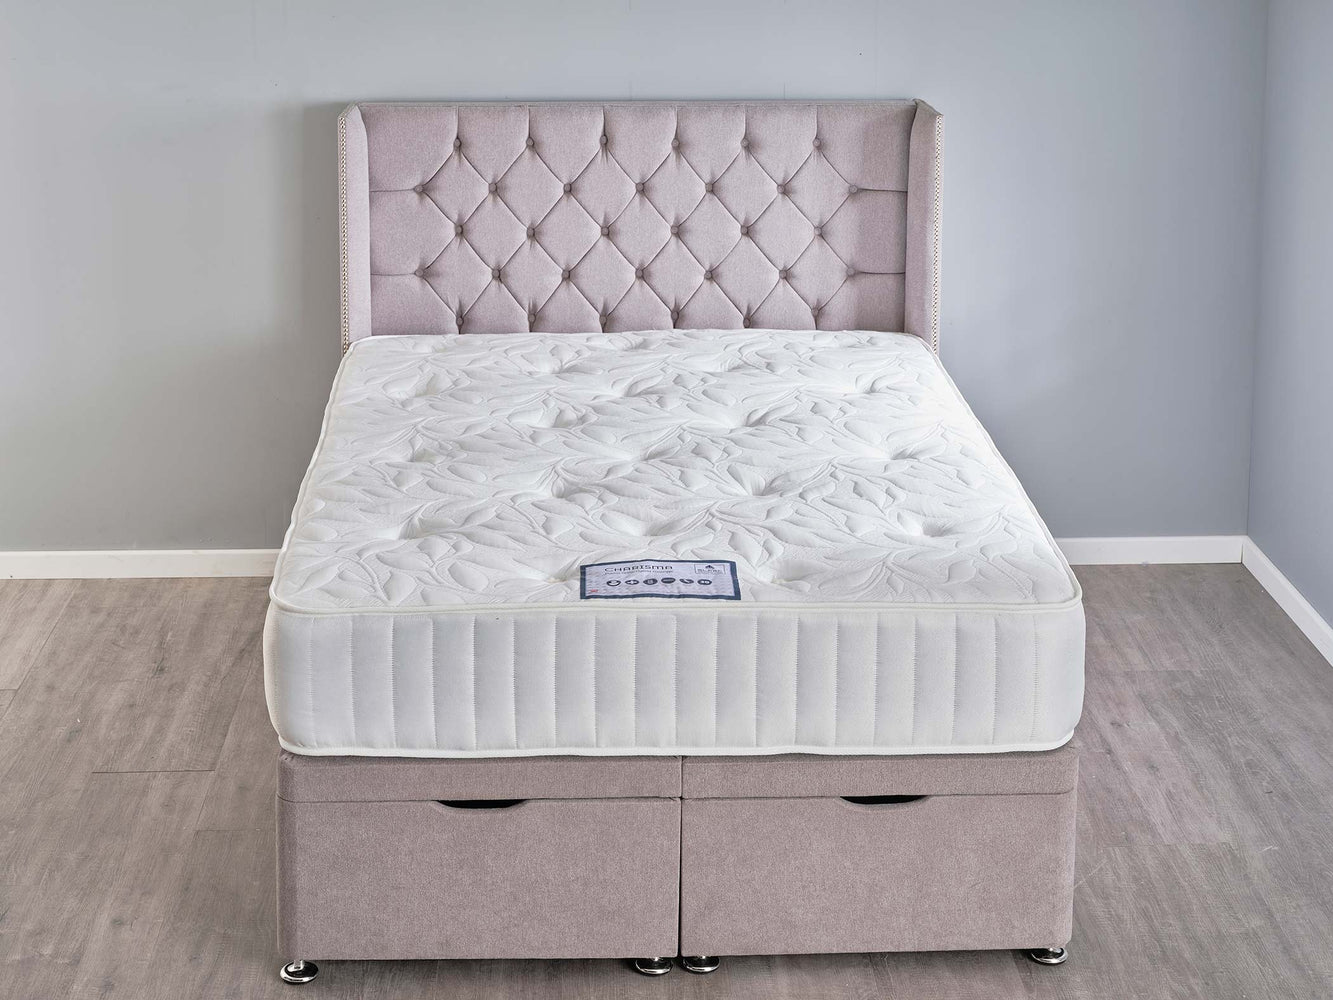 The Ottoman Bed